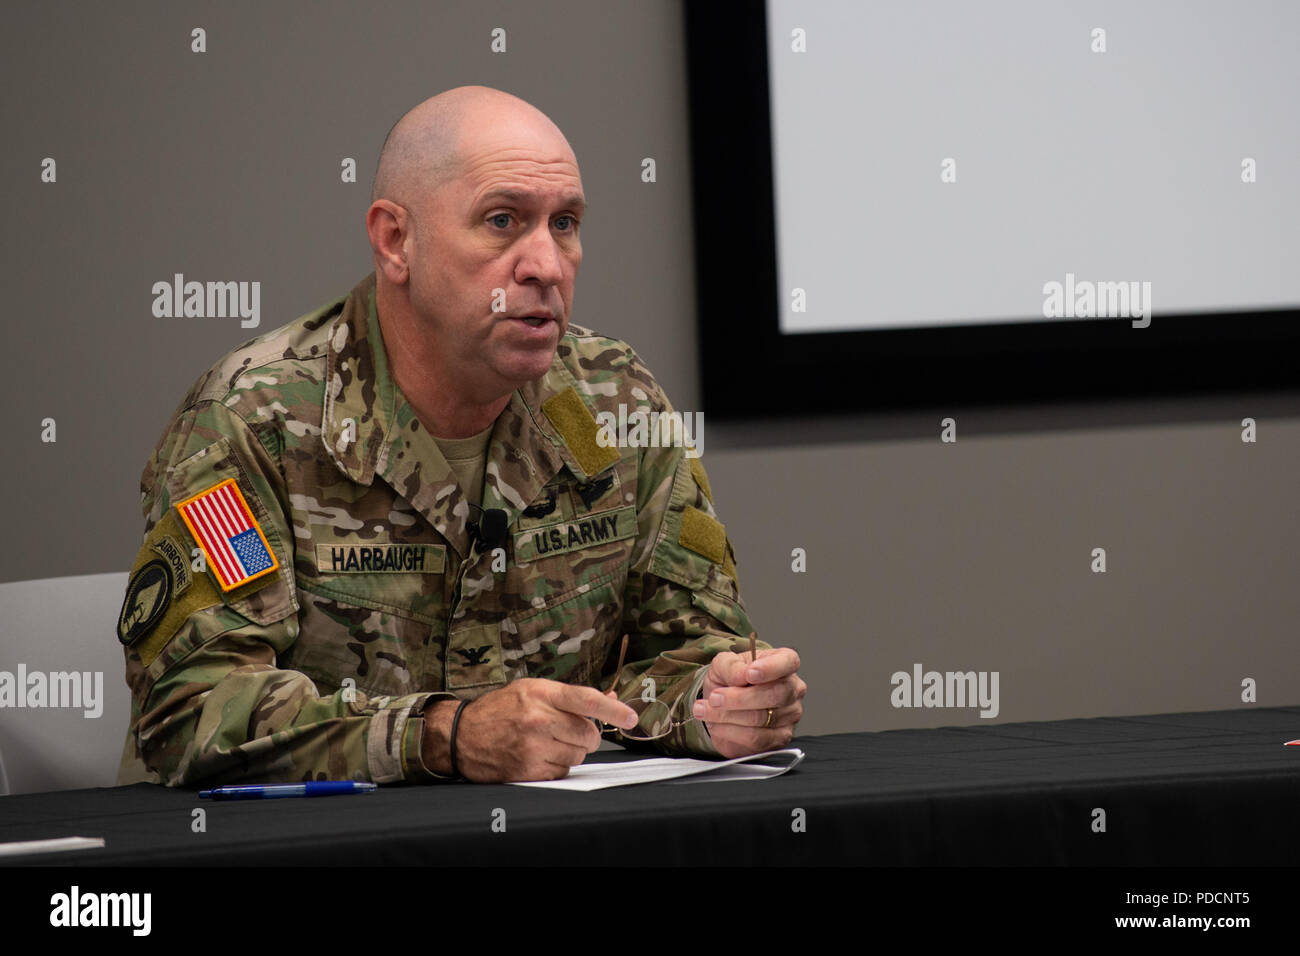 Army Col. Cary Harbaugh, U.S. Special Operations Command Warrior Games 2019 director, briefs local media on the 2019 DoD Warrior Games in Tampa, Fla., Aug. 6, 2018. The games, scheduled from June 21-30, introduce wounded, ill and injured service members and veterans to paralympic-style sports. More than 300 athletes will compete in 14 events located in downtown Tampa and surrounding areas. (Photo by U.S. Air Force Master Sgt. Barry Loo) Stock Photo